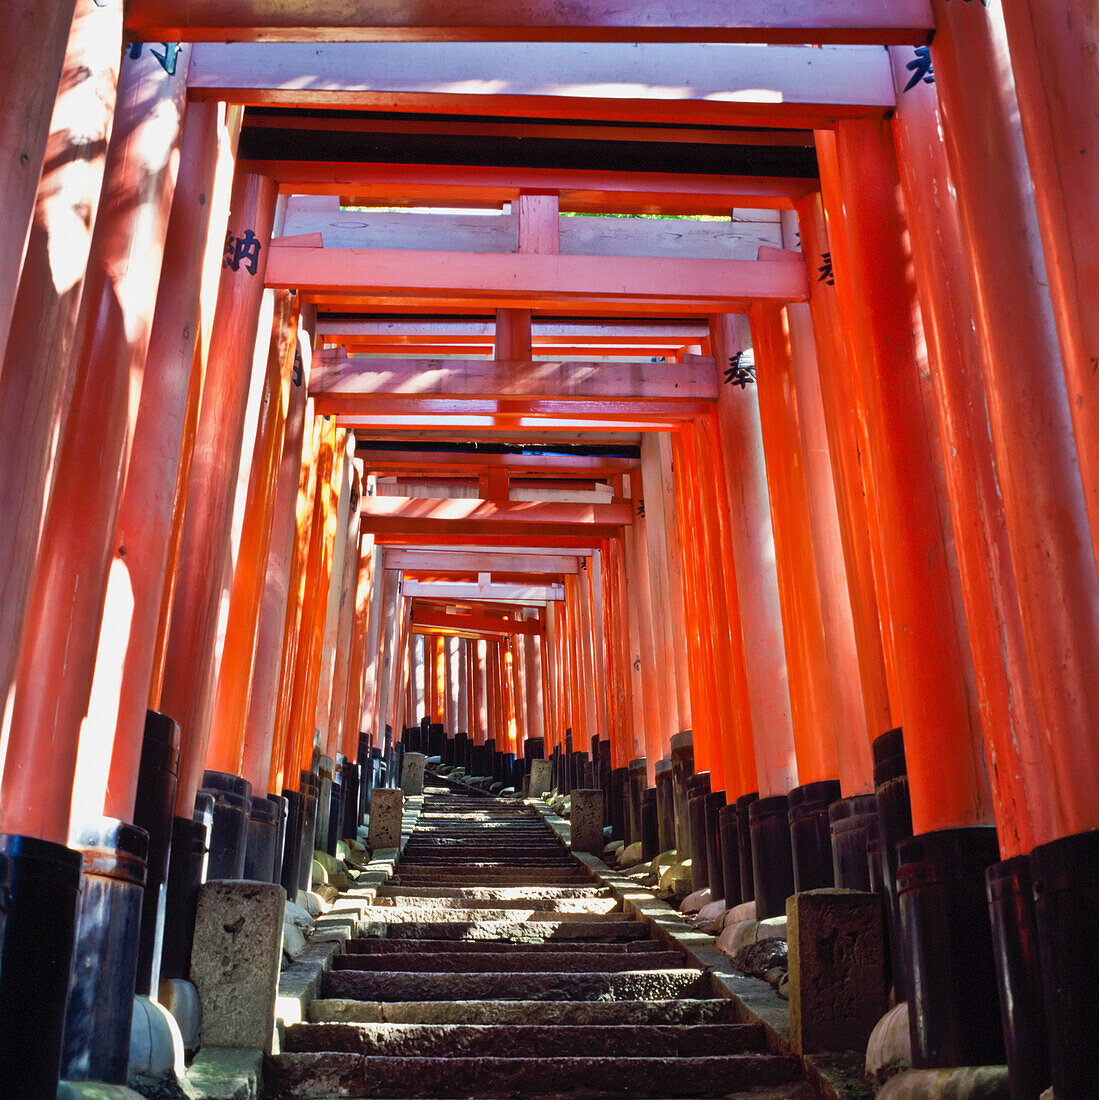 Red Torii Arches Over Steps At Inari Temple.